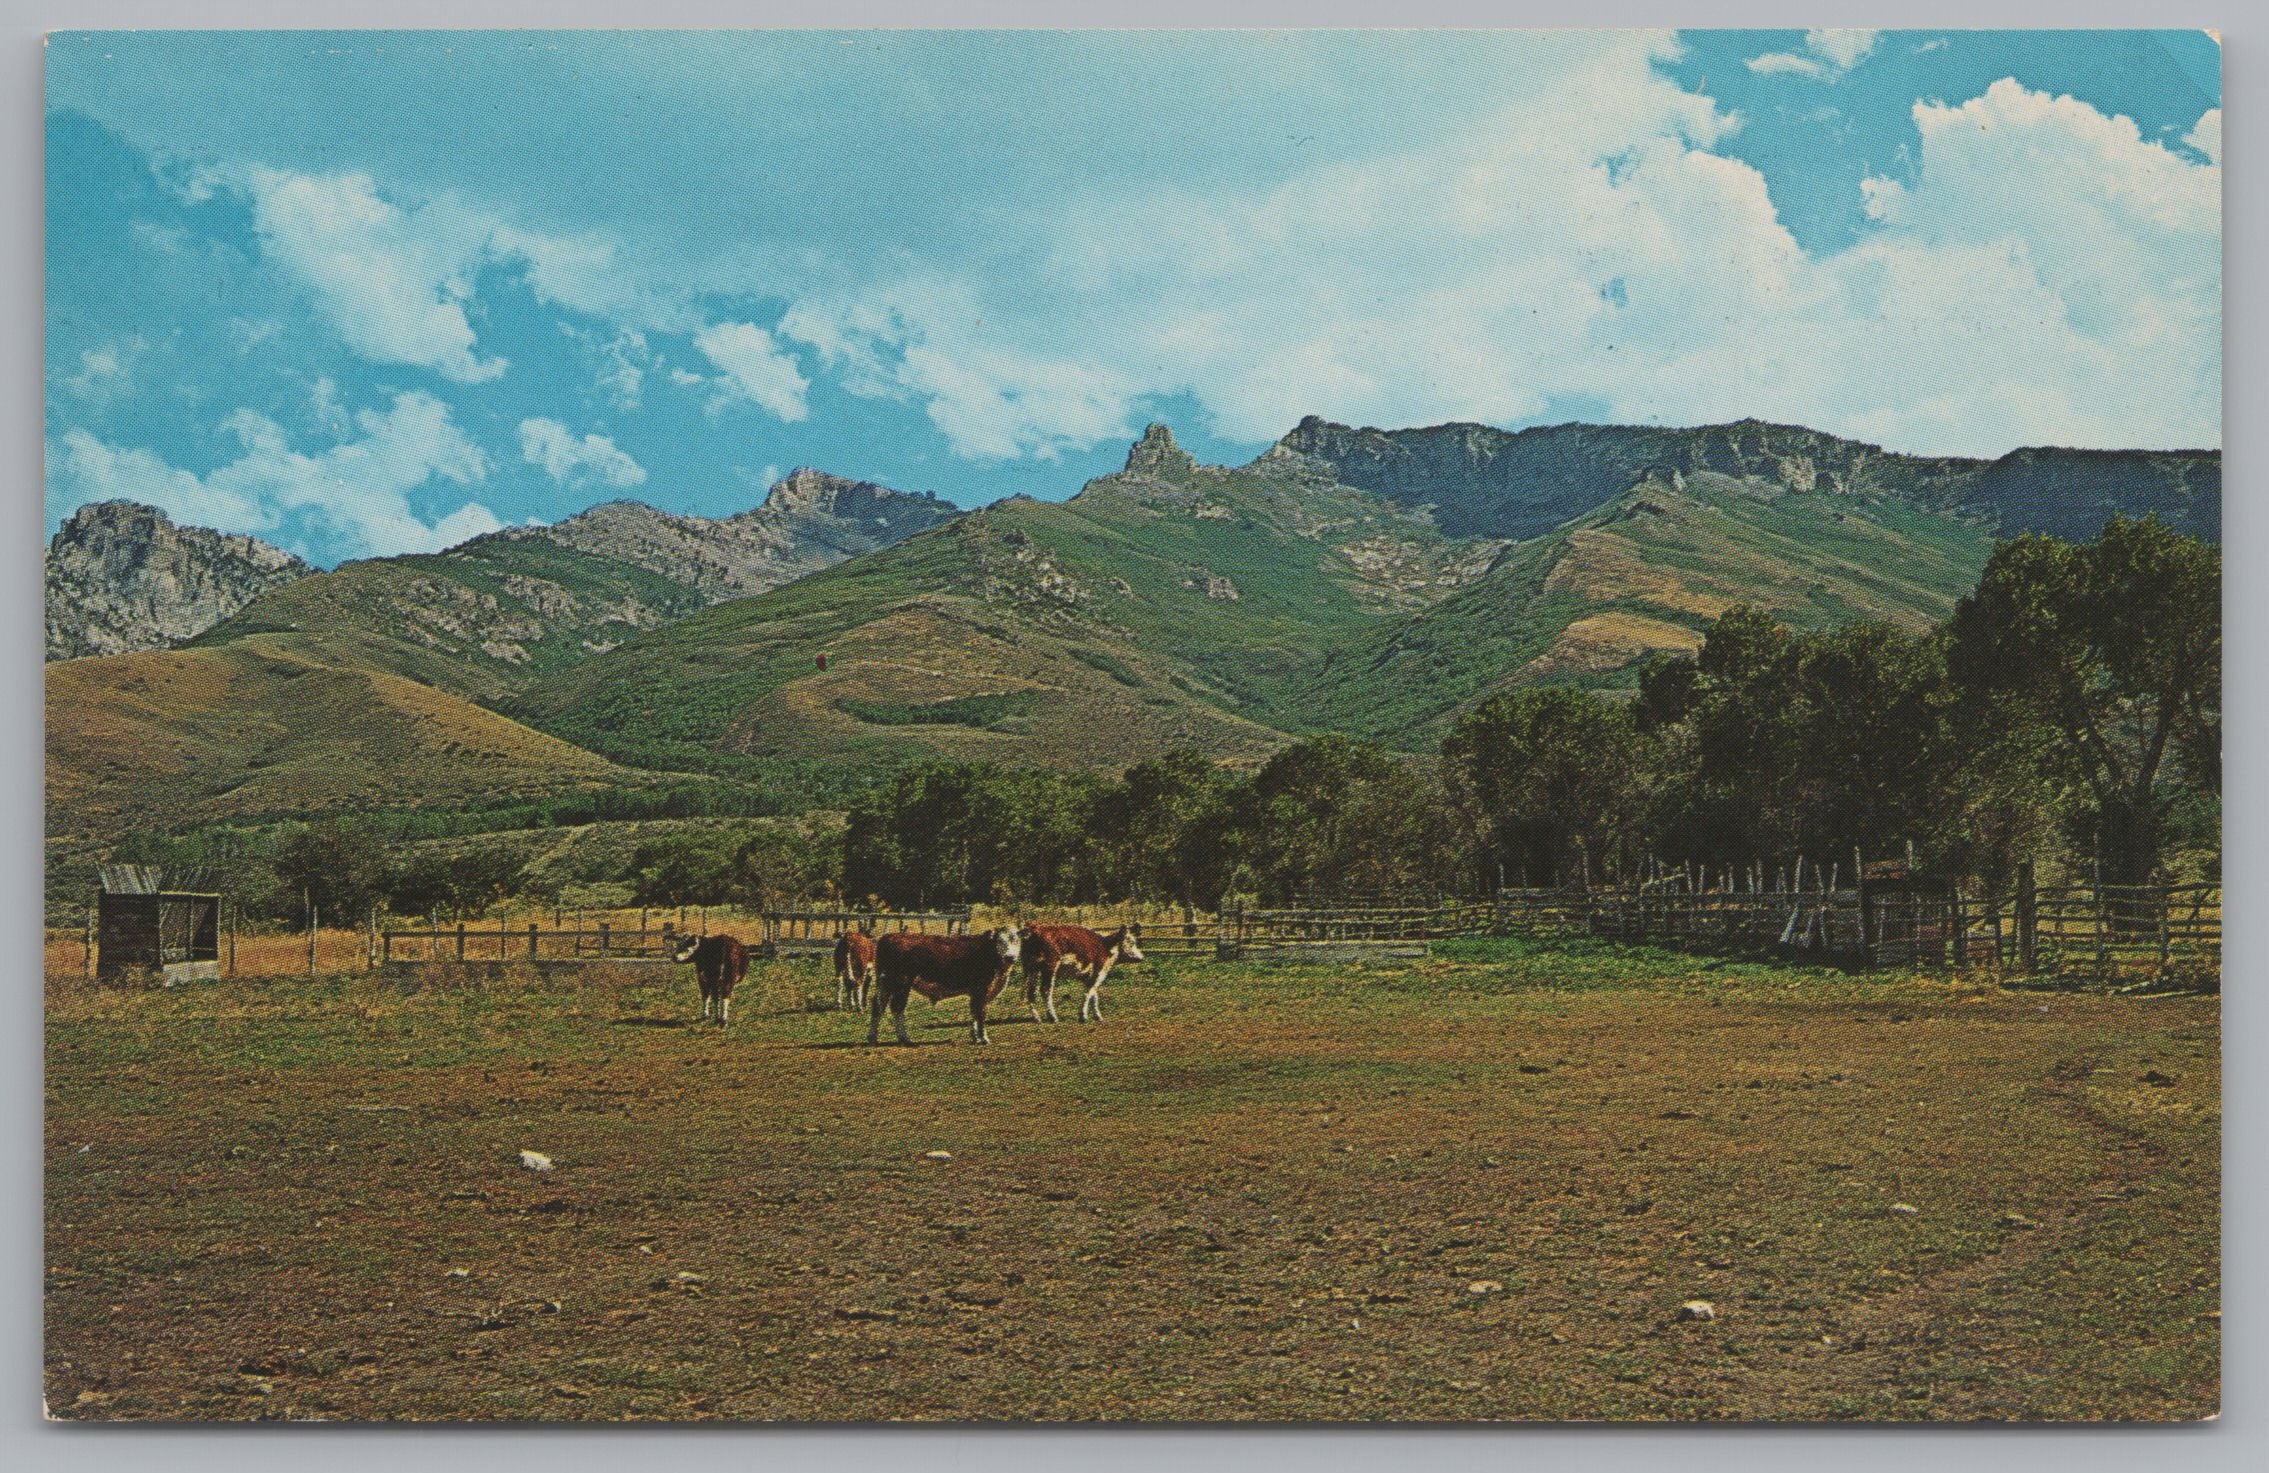 The Unspoiled West, Nevada, Cattle, Mountains, USA, Vintage Post Card.